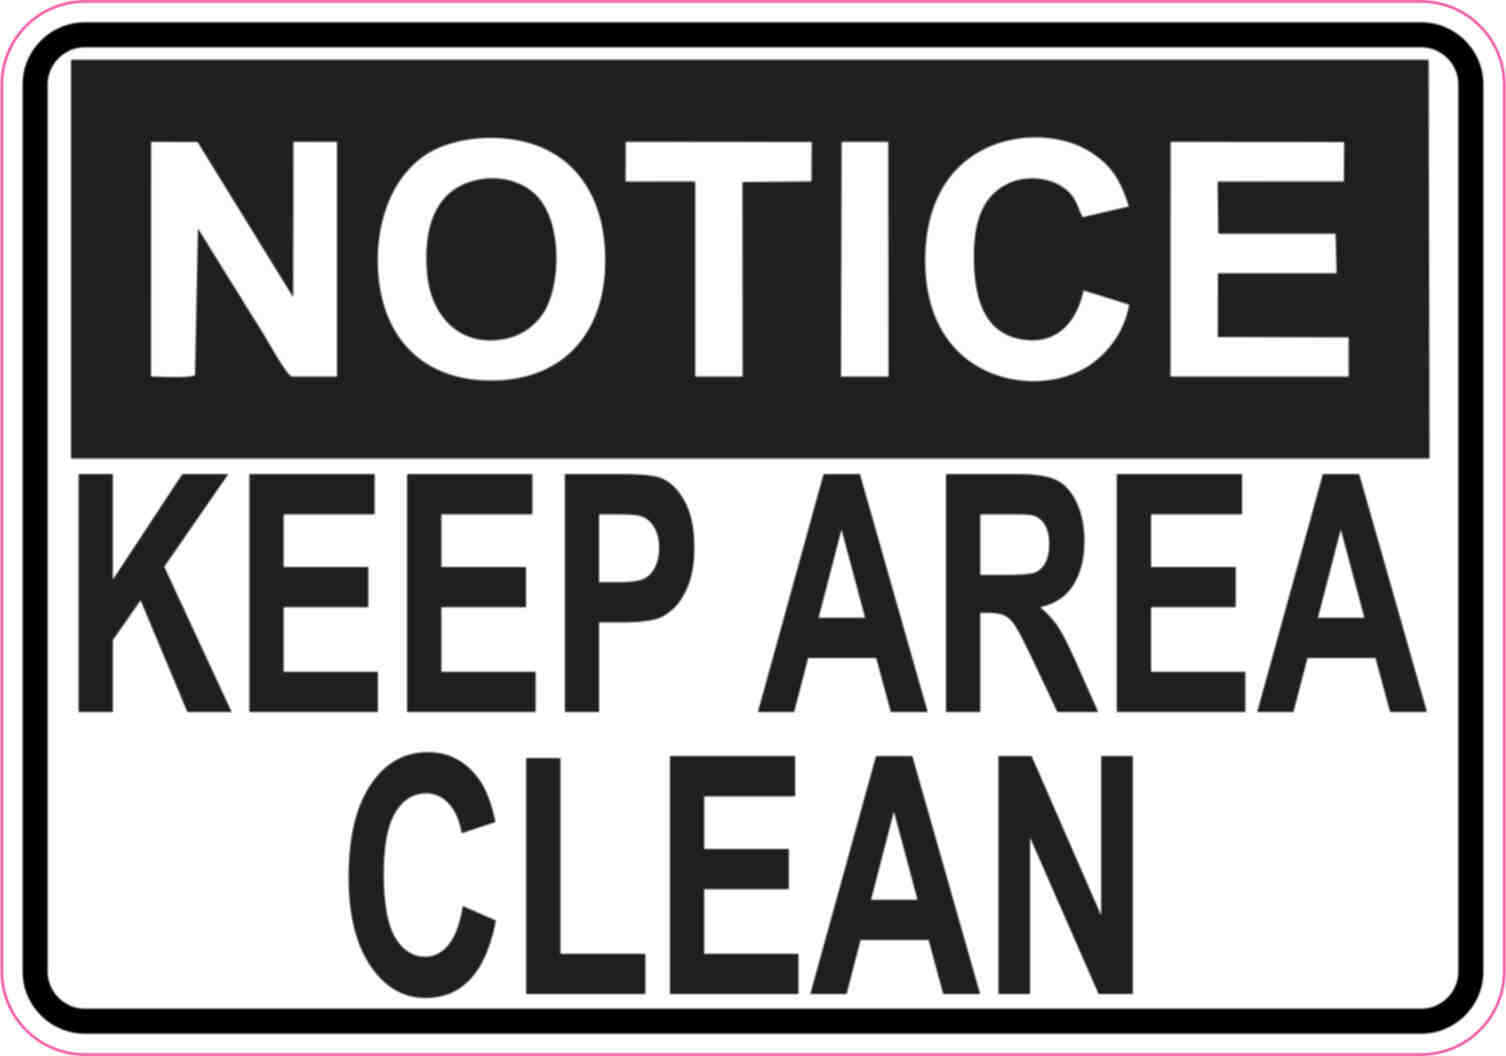 5 x 3.5 Notice Keep Area Clean Sticker Vinyl Sign Stickers Business Wall Signs